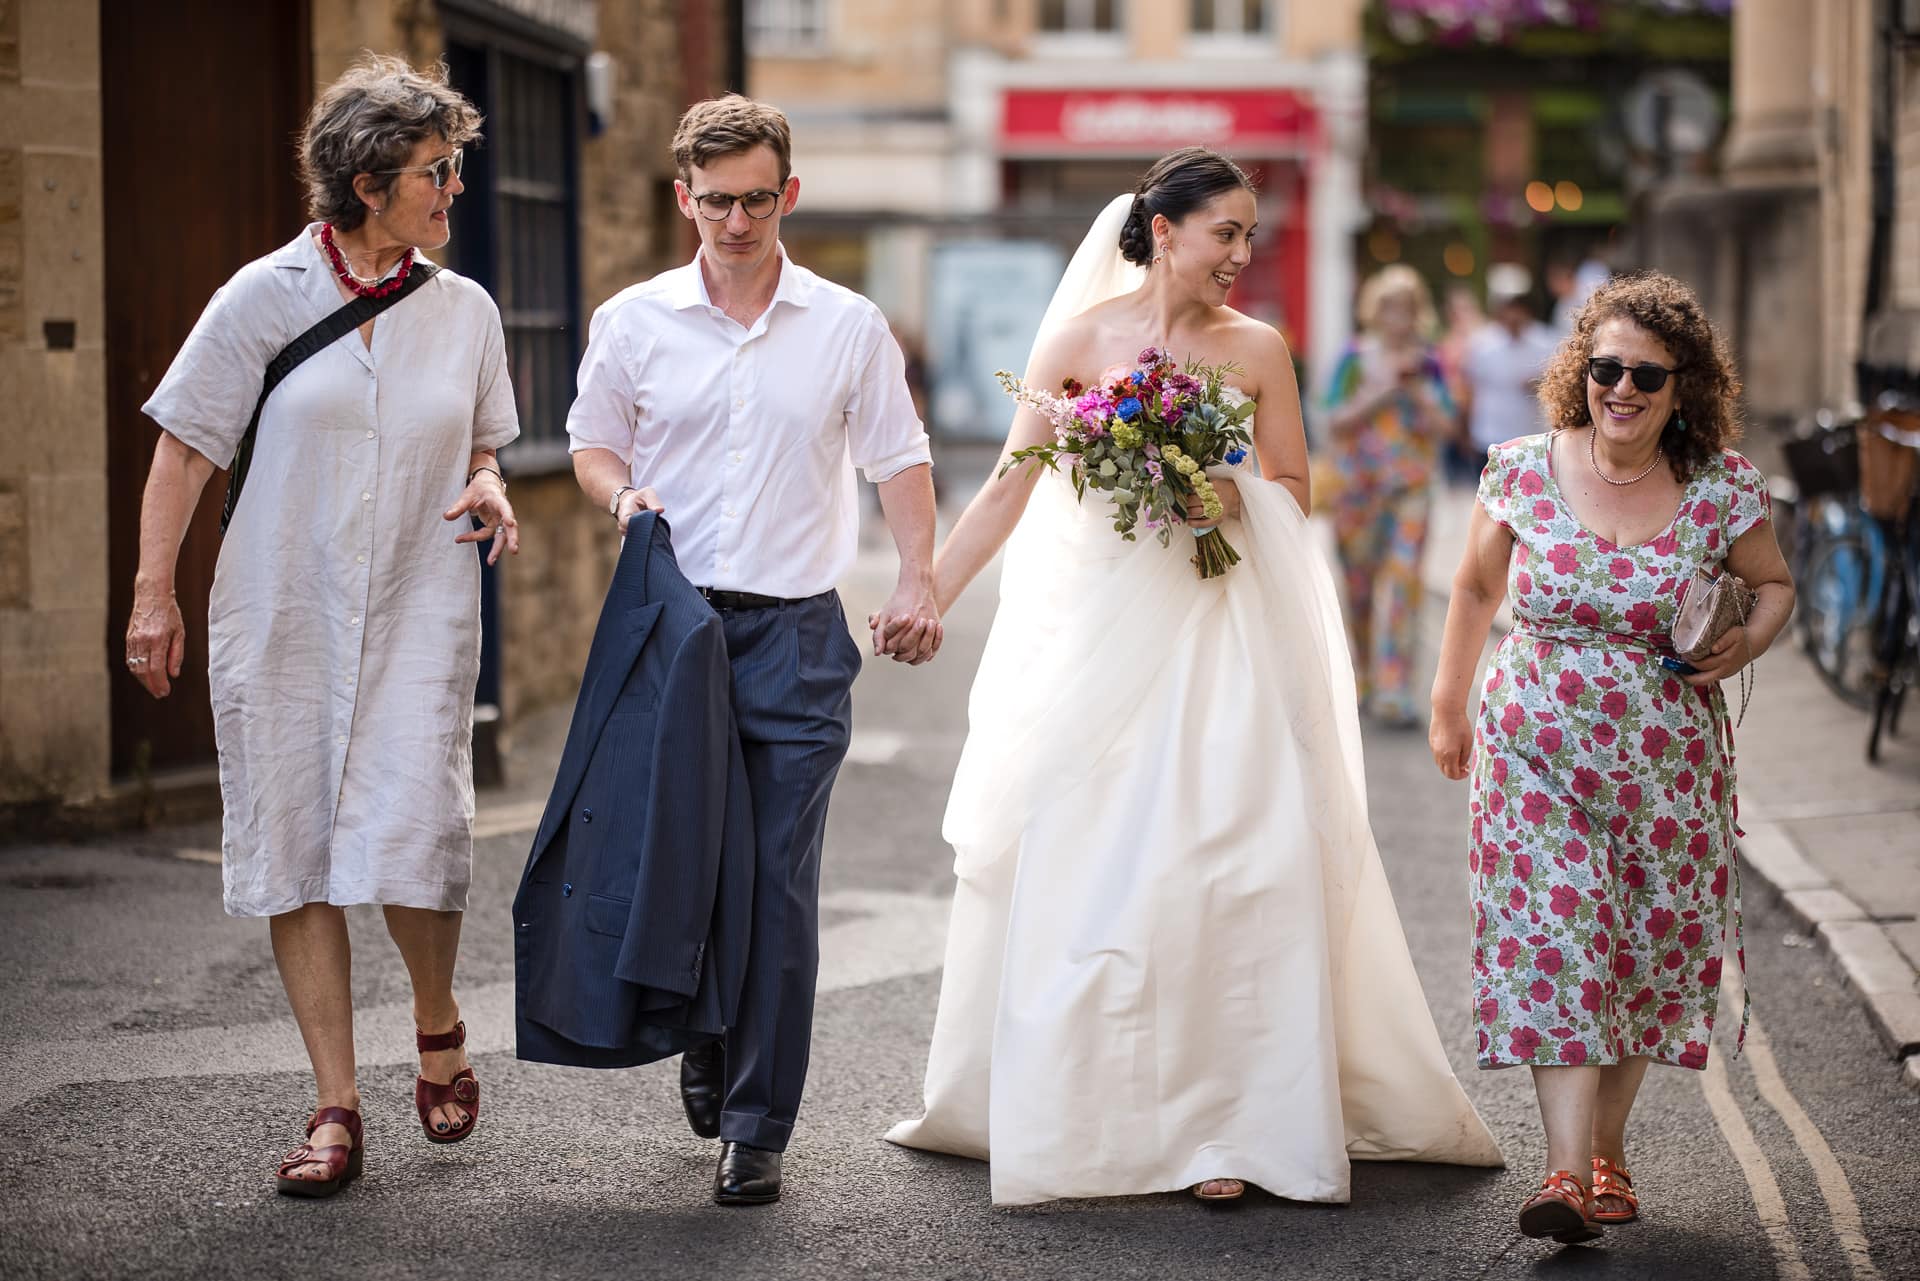 The Bride and Groom and two guests walking through Oxford City Centre.